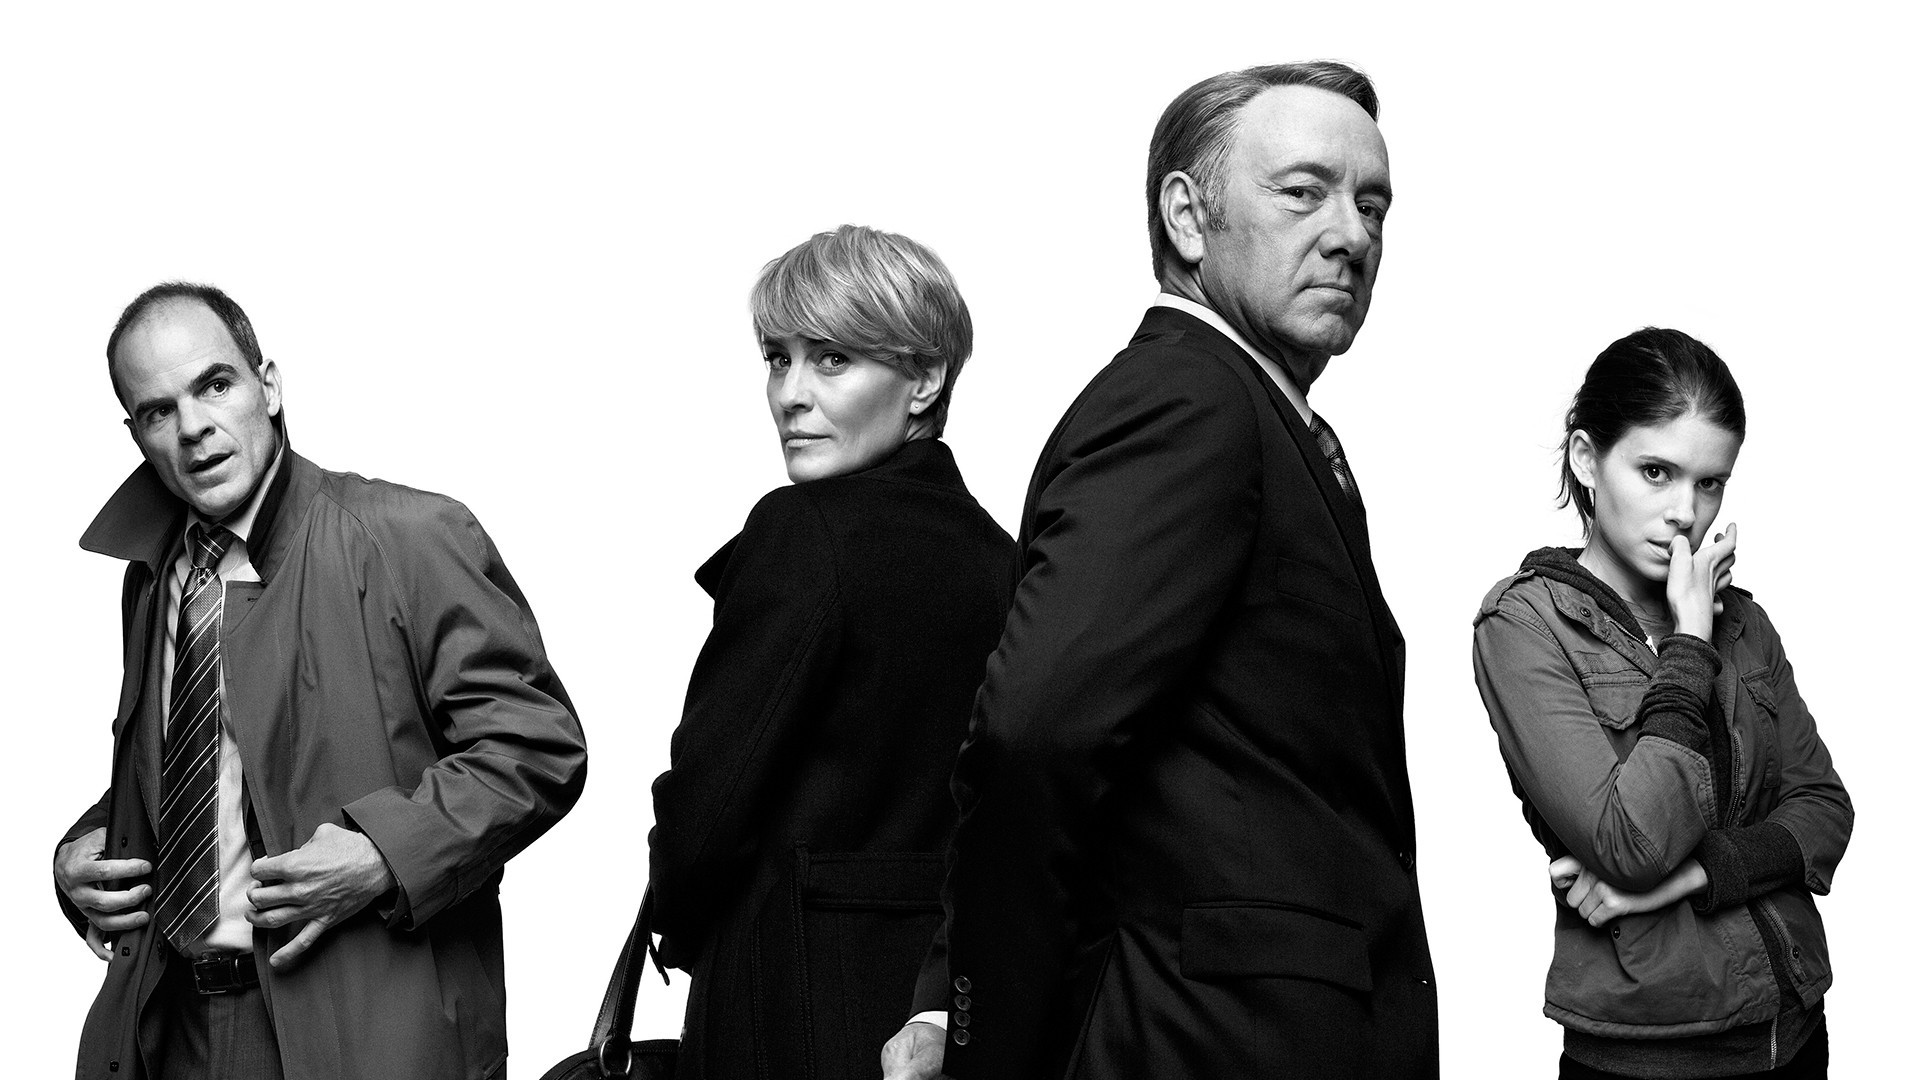 House Of Cards, Kevin Spacey, Actor, Monochrome, Kate Mara, Robin Wright, Michael Kelly Wallpaper